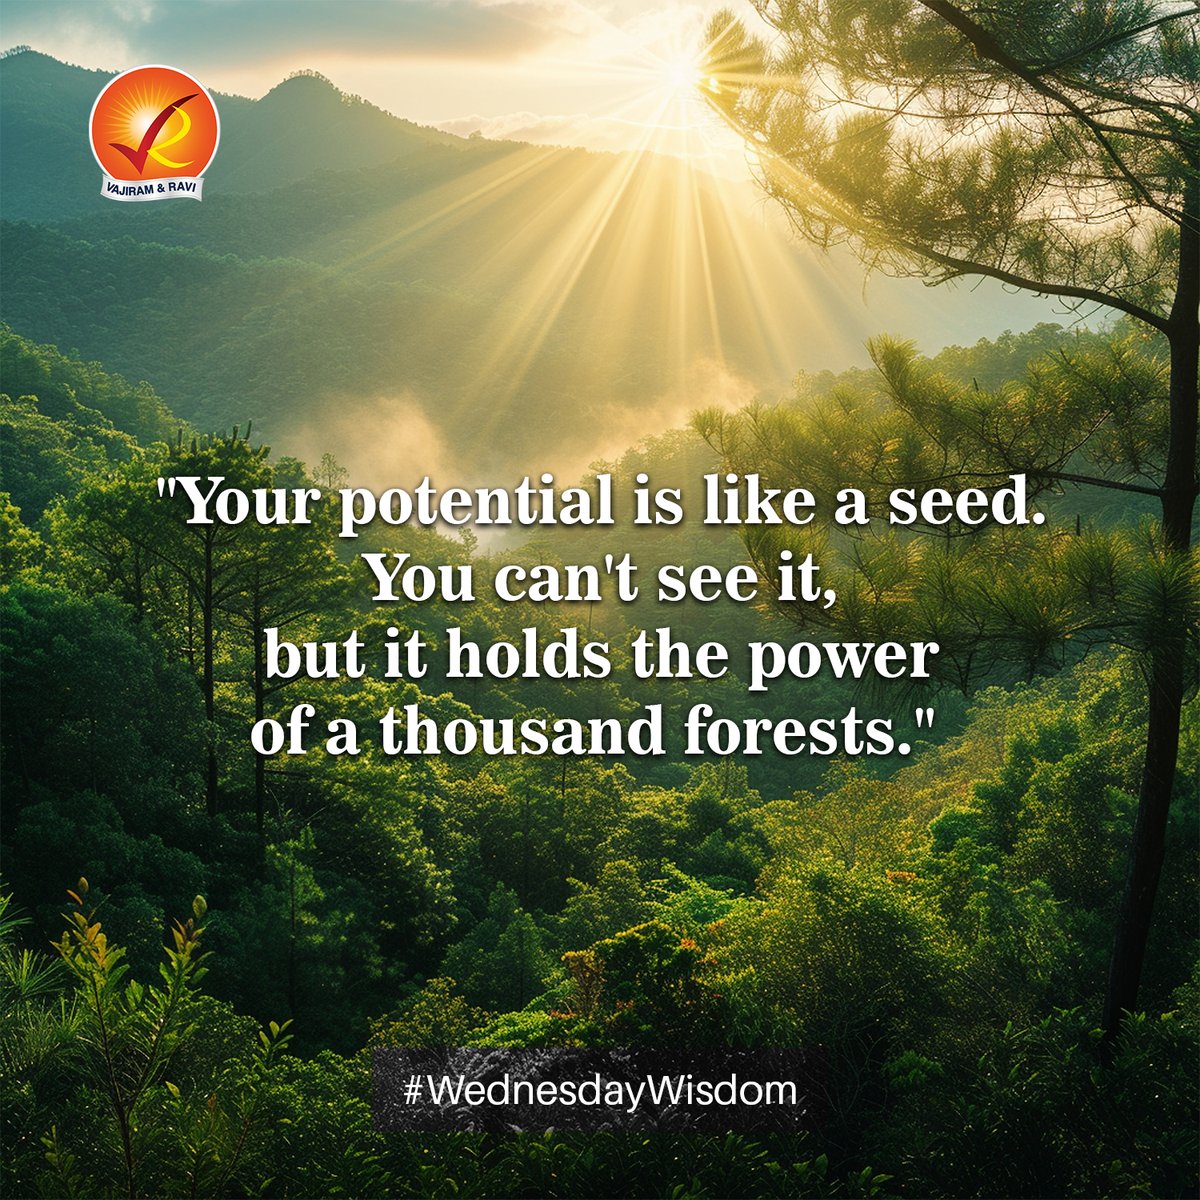 Your potential is like a seed. You can't see it, but it holds the power of a thousand forests.

#WednesdayWisdom💡 |  #wellnesswednesday #motivationday #motivation #motivationeveryday #wisdom #wisdomquote #wordsofwisdom #happiness #inspiration #mindset #wisewords  #upscmotivation